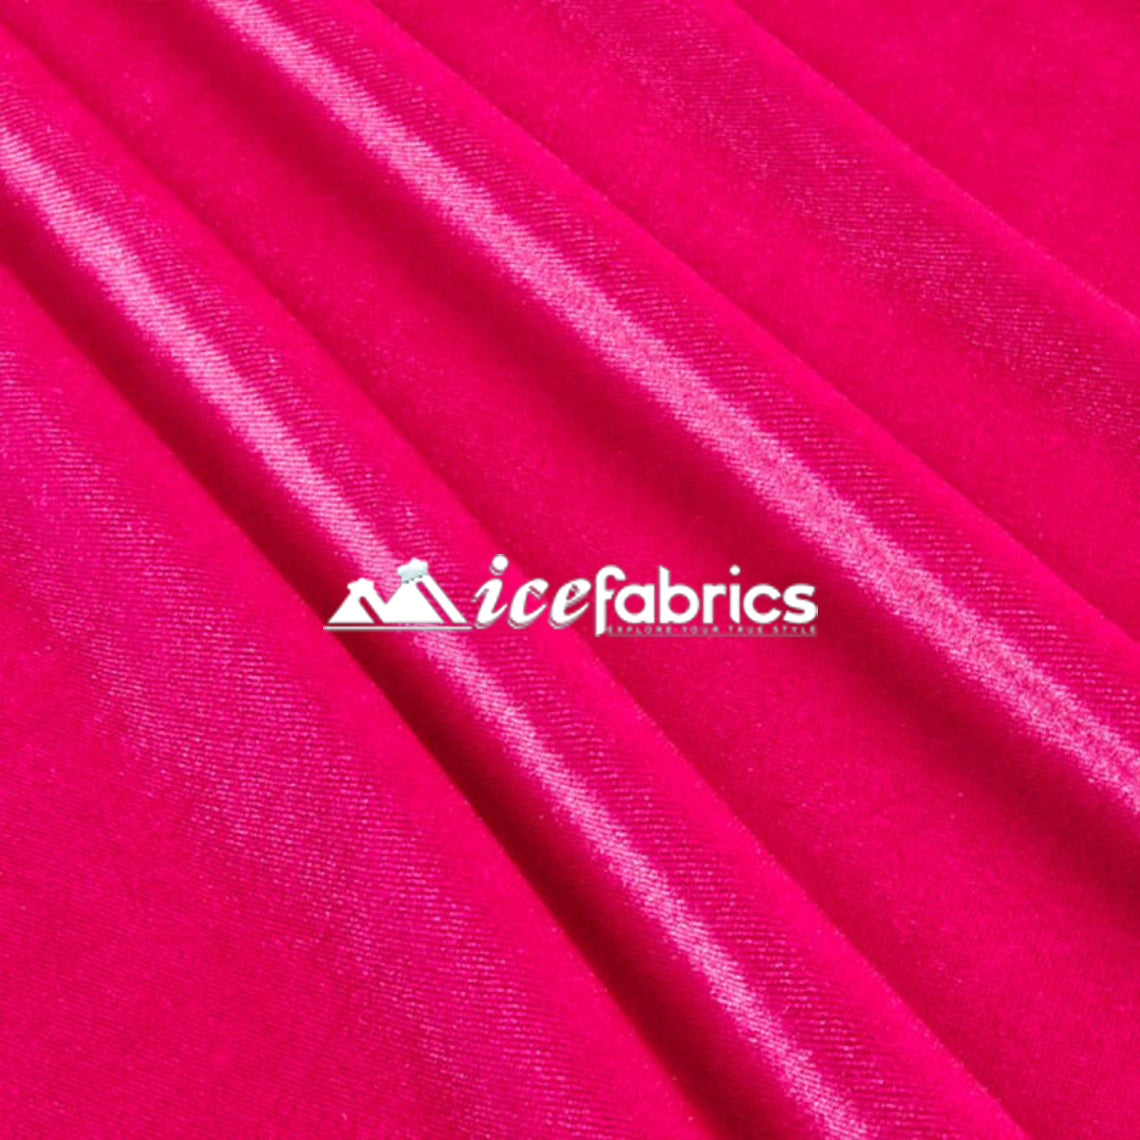 4 Way Stretch Tulle Fabric With Red Velvet Hearts, Pink Stretchy Mesh  Fabric, Elastic Tulle Fabric, Smooth, Well Drape -  Canada